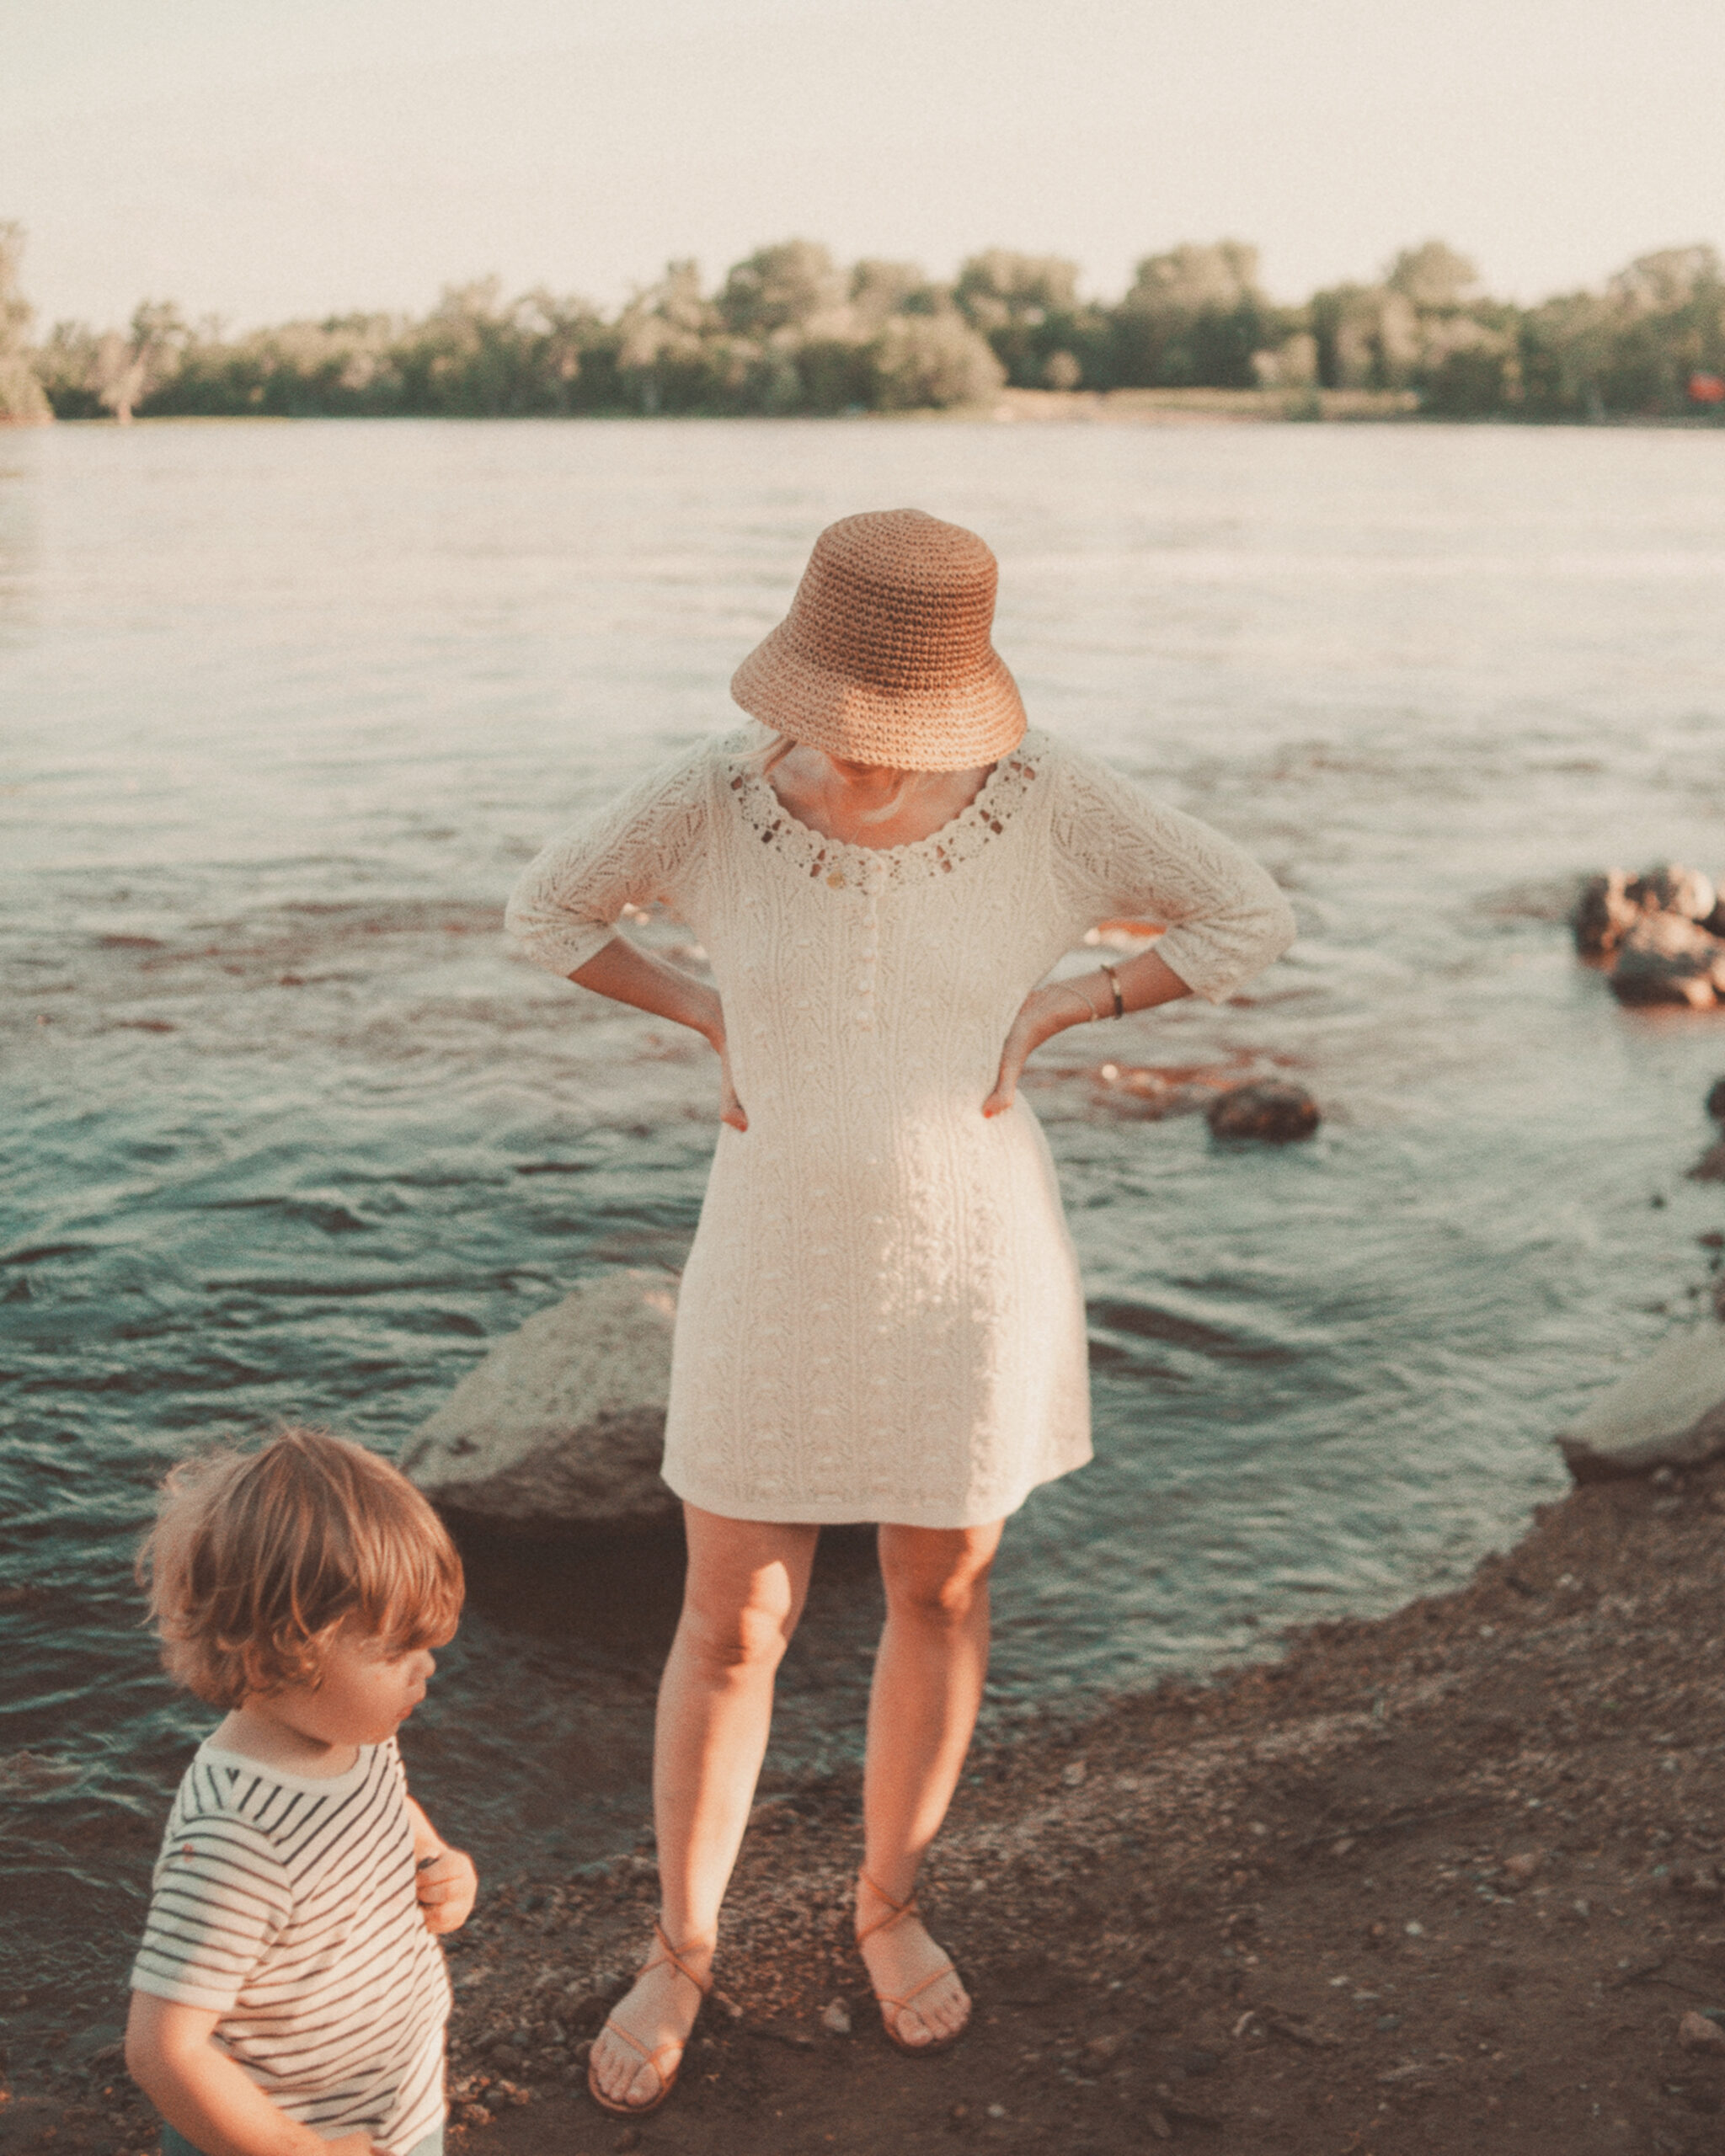 Karin Emily wears a little crochet dress from Sezane and a straw bucket hat from Vitamin A in front of a riverfront